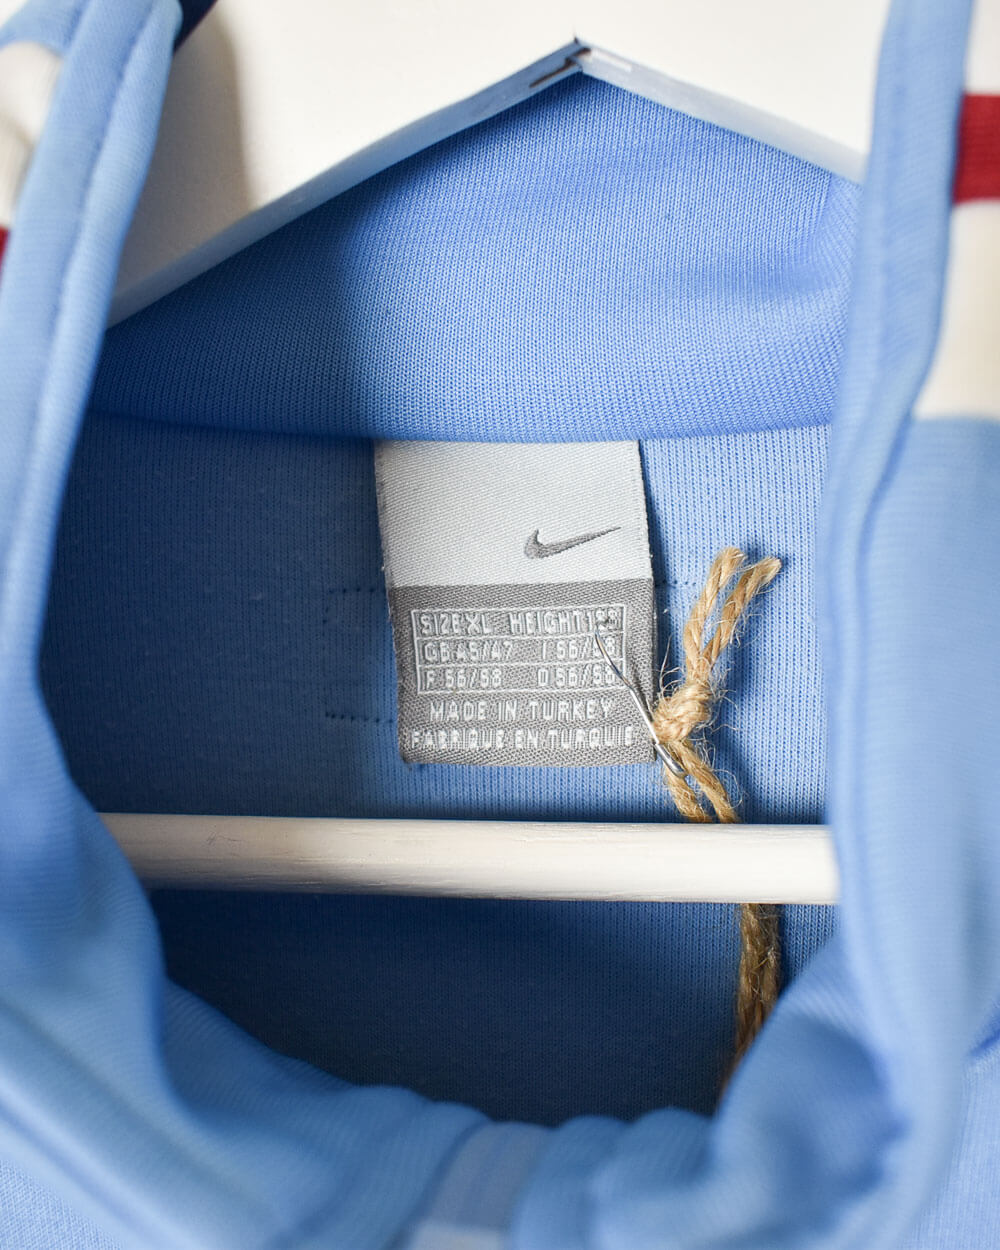 Baby Nike Tracksuit Top - X-Large